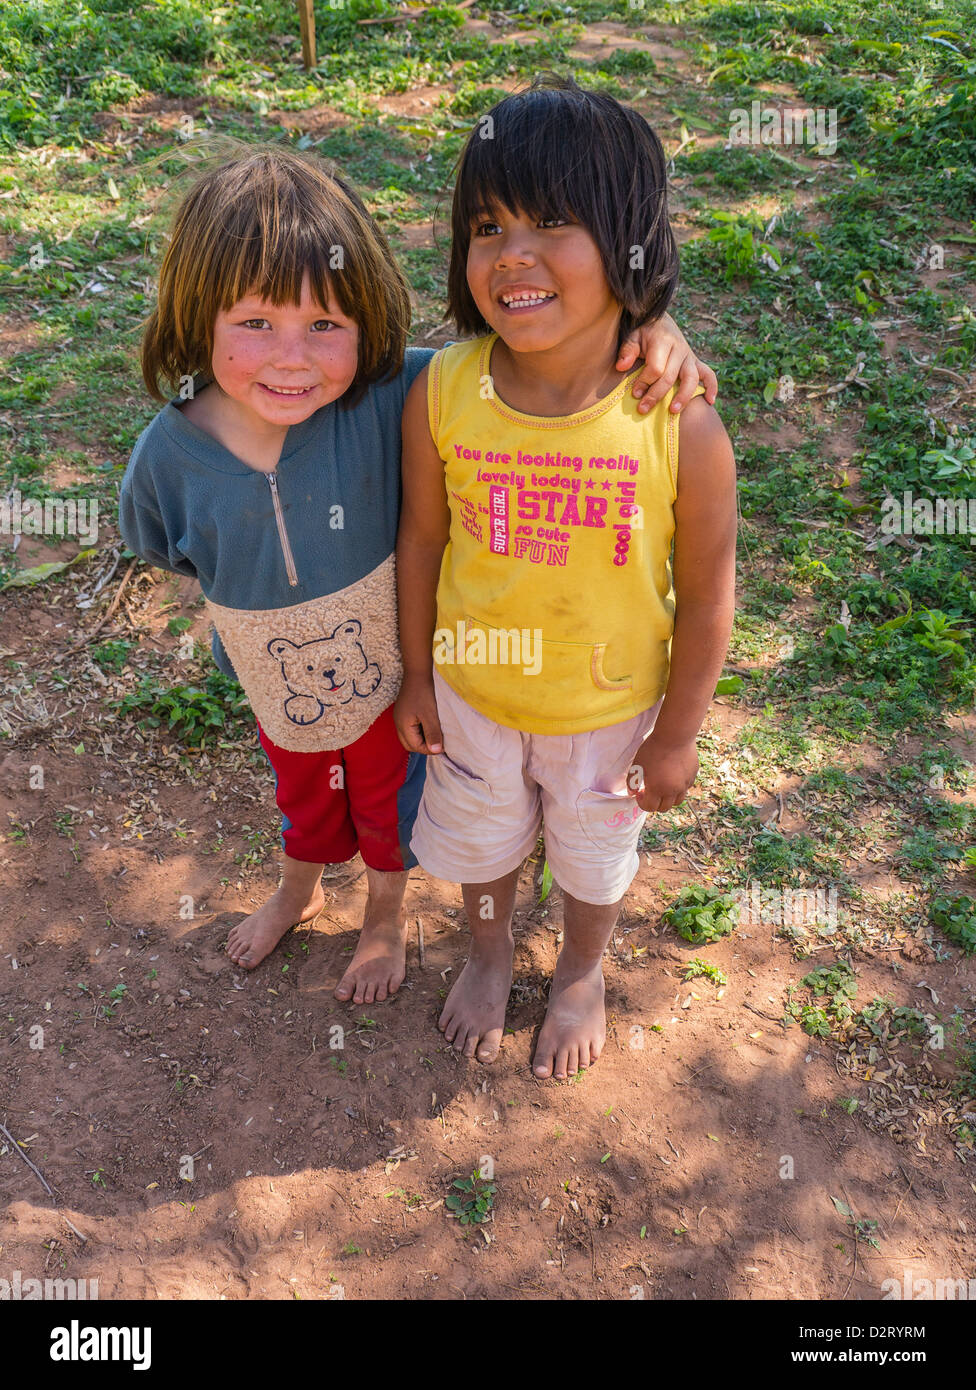 Two young Paraguayan Hispanic girls who are best friends stand, smiling, with one having her arm around the other. Both girls ar Stock Photo